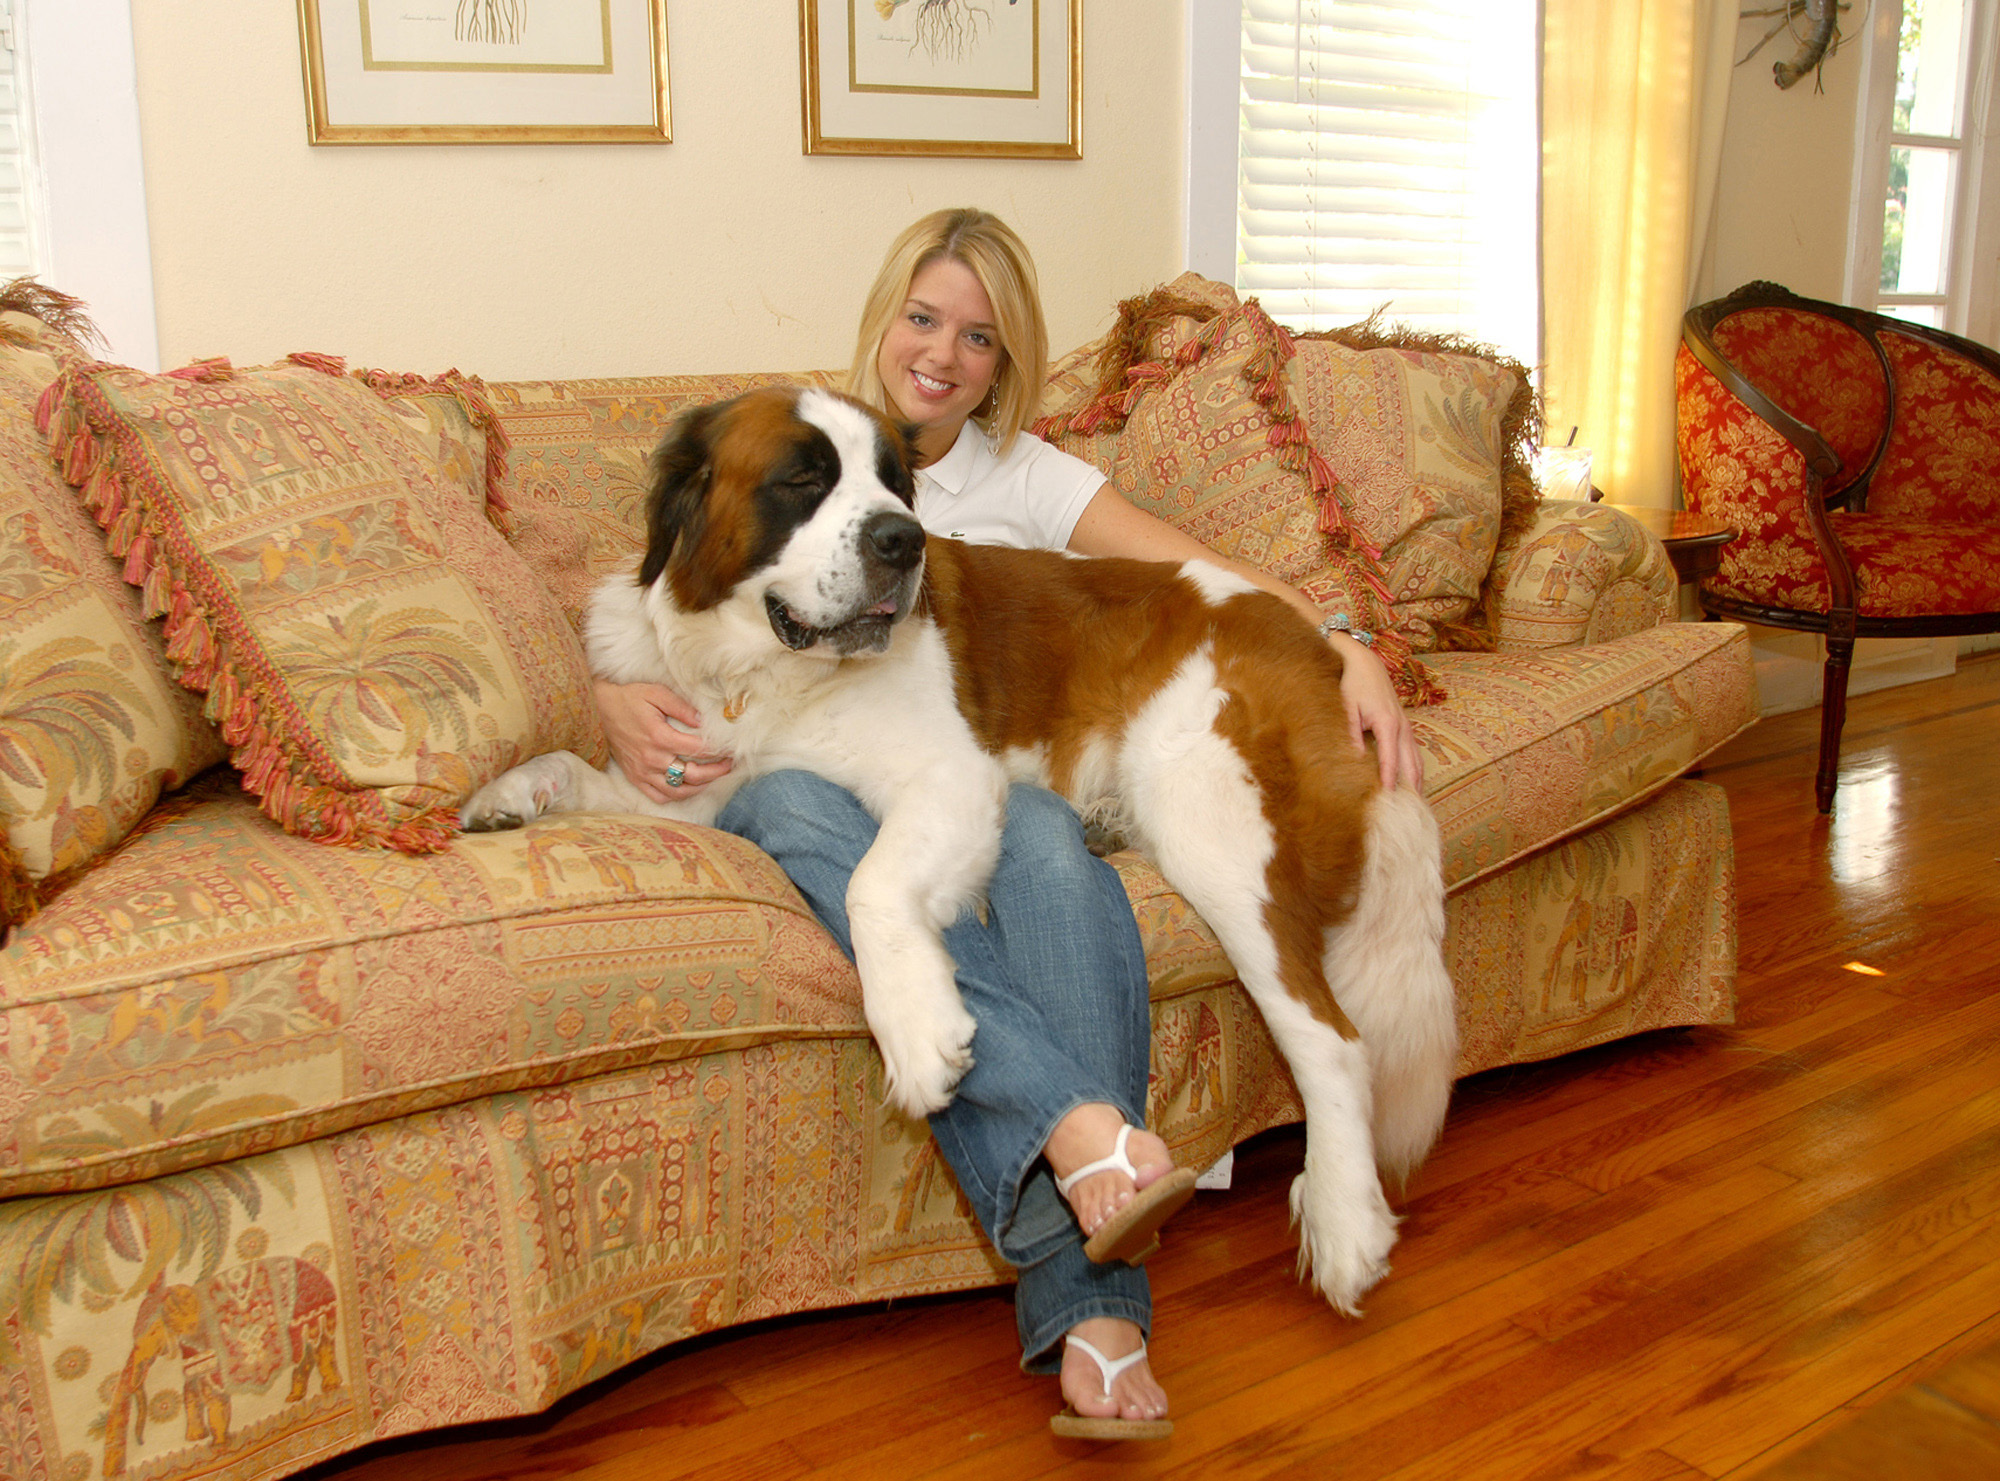 Pam Bondi sits with Noah, her adopted St. Bernard dog who was rescued from a shelter after Hurricane Katrina, on July 25, 2006, at her home in Tampa, Florida. 